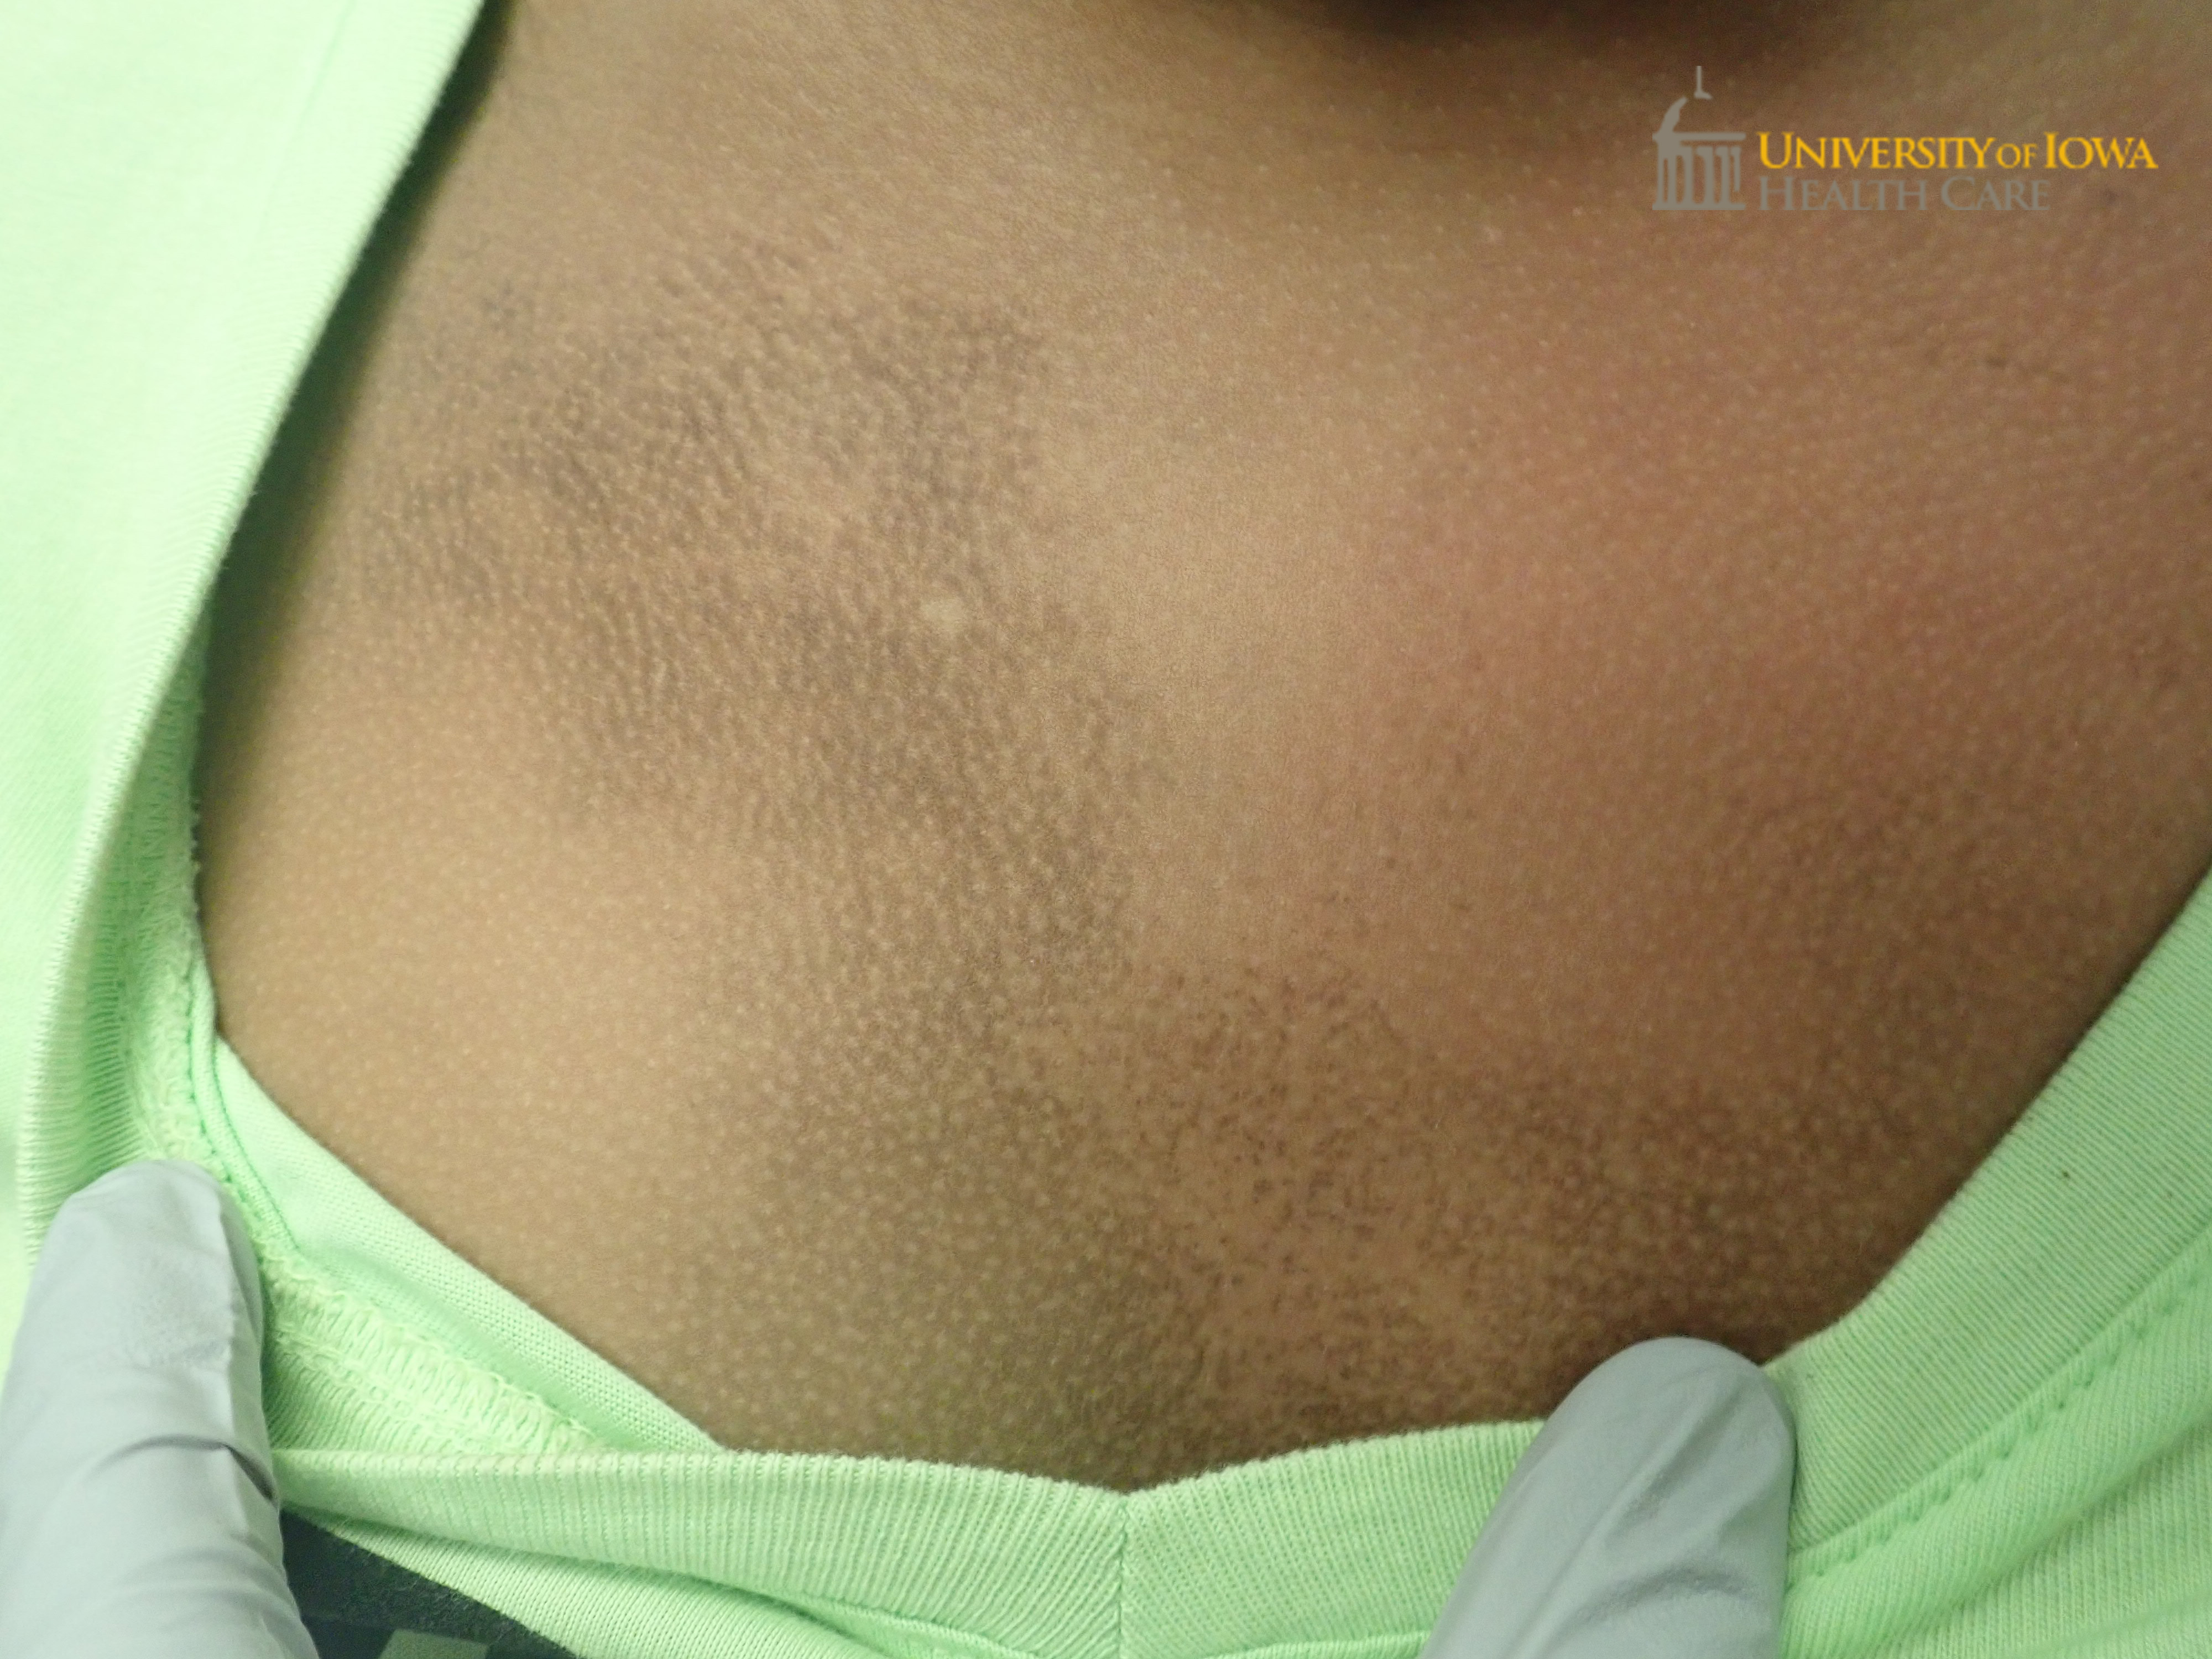 Brown patch with follicular sparing on the chest. (click images for higher resolution).